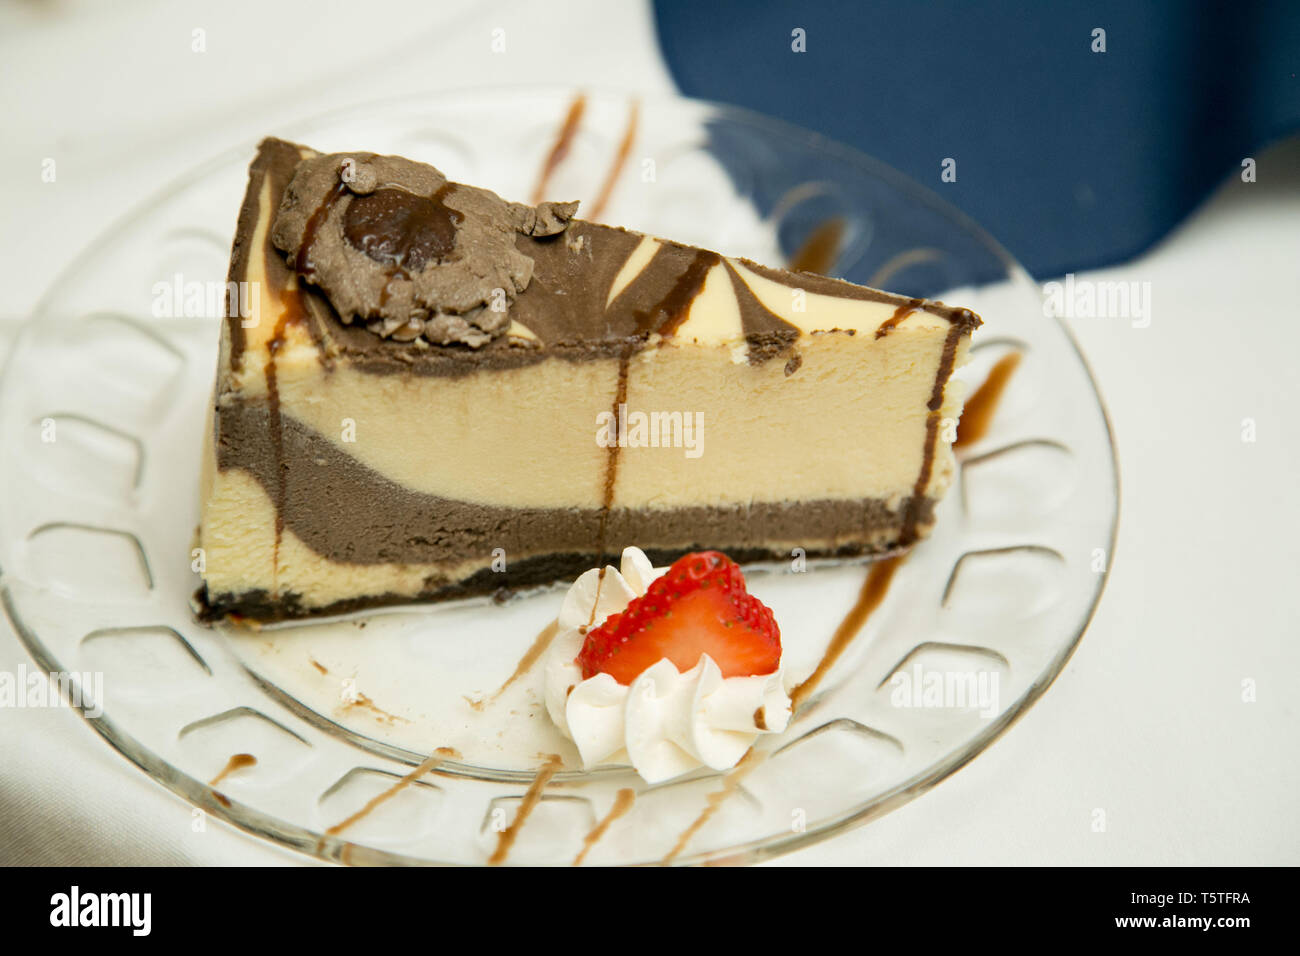 cheese cake dessert for guests at a celebarion Stock Photo